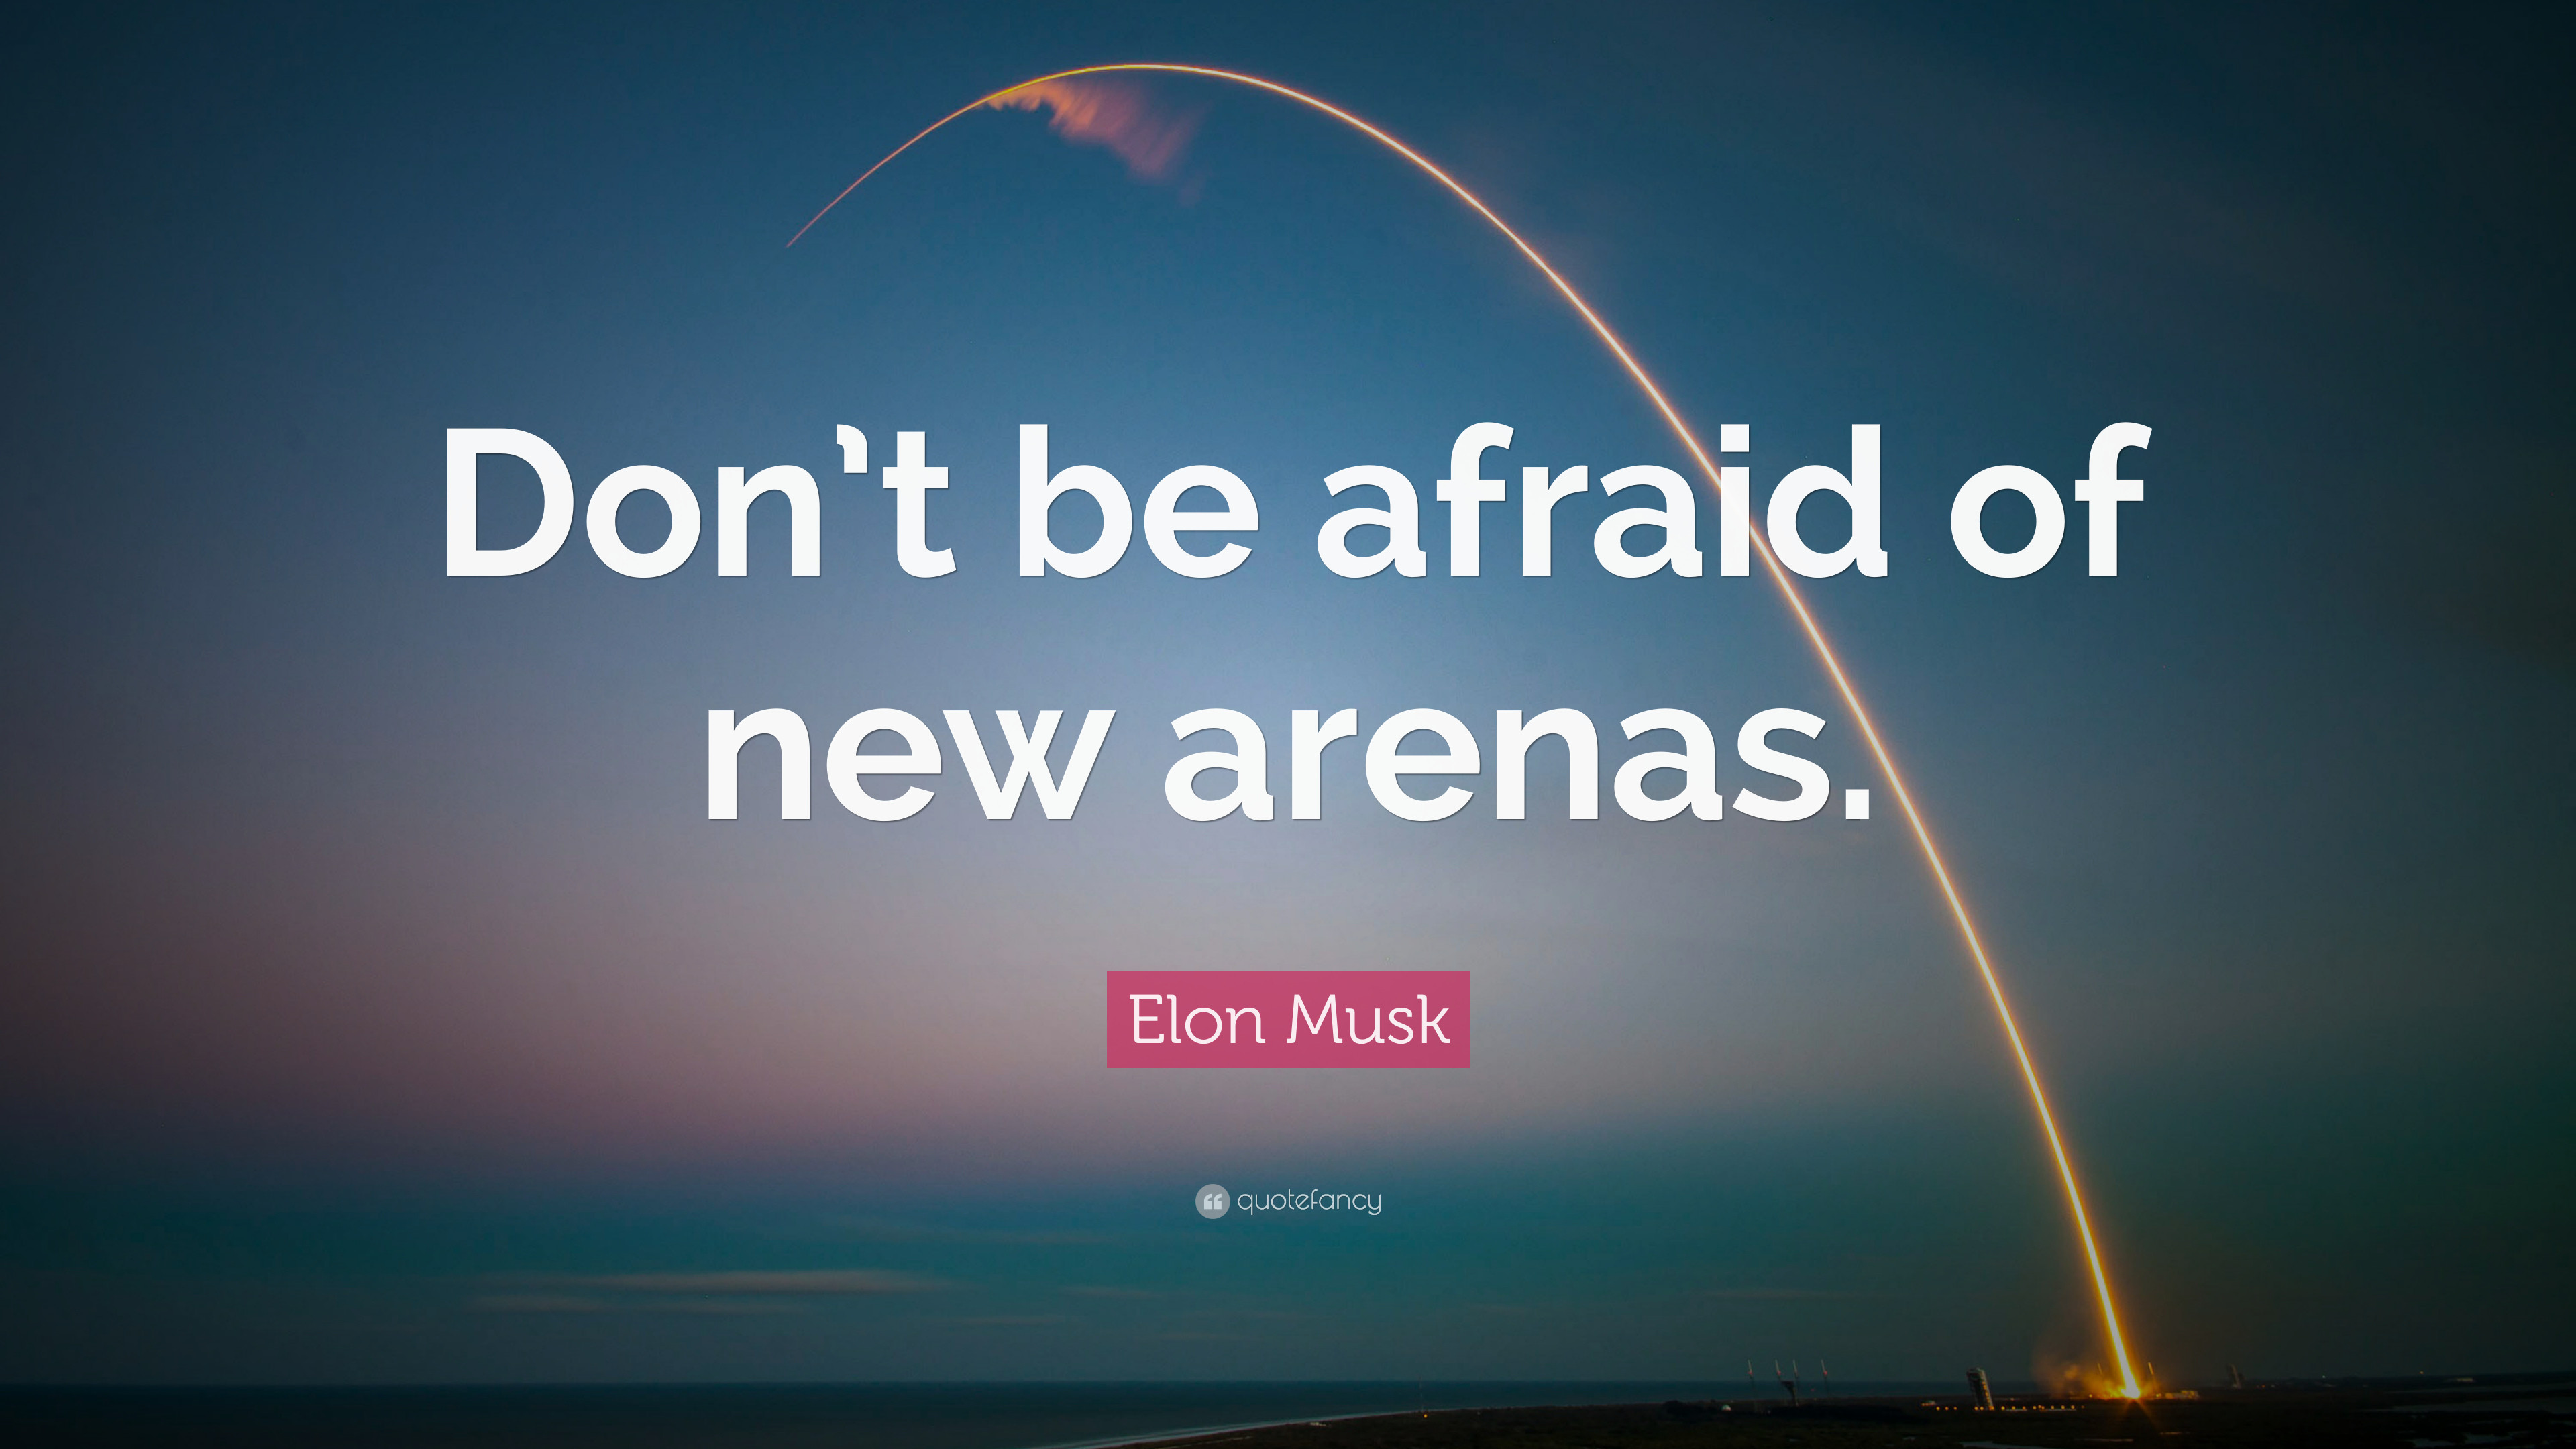 3840x2160 Elon Musk Quote: “Don't be afraid of new arenas.”